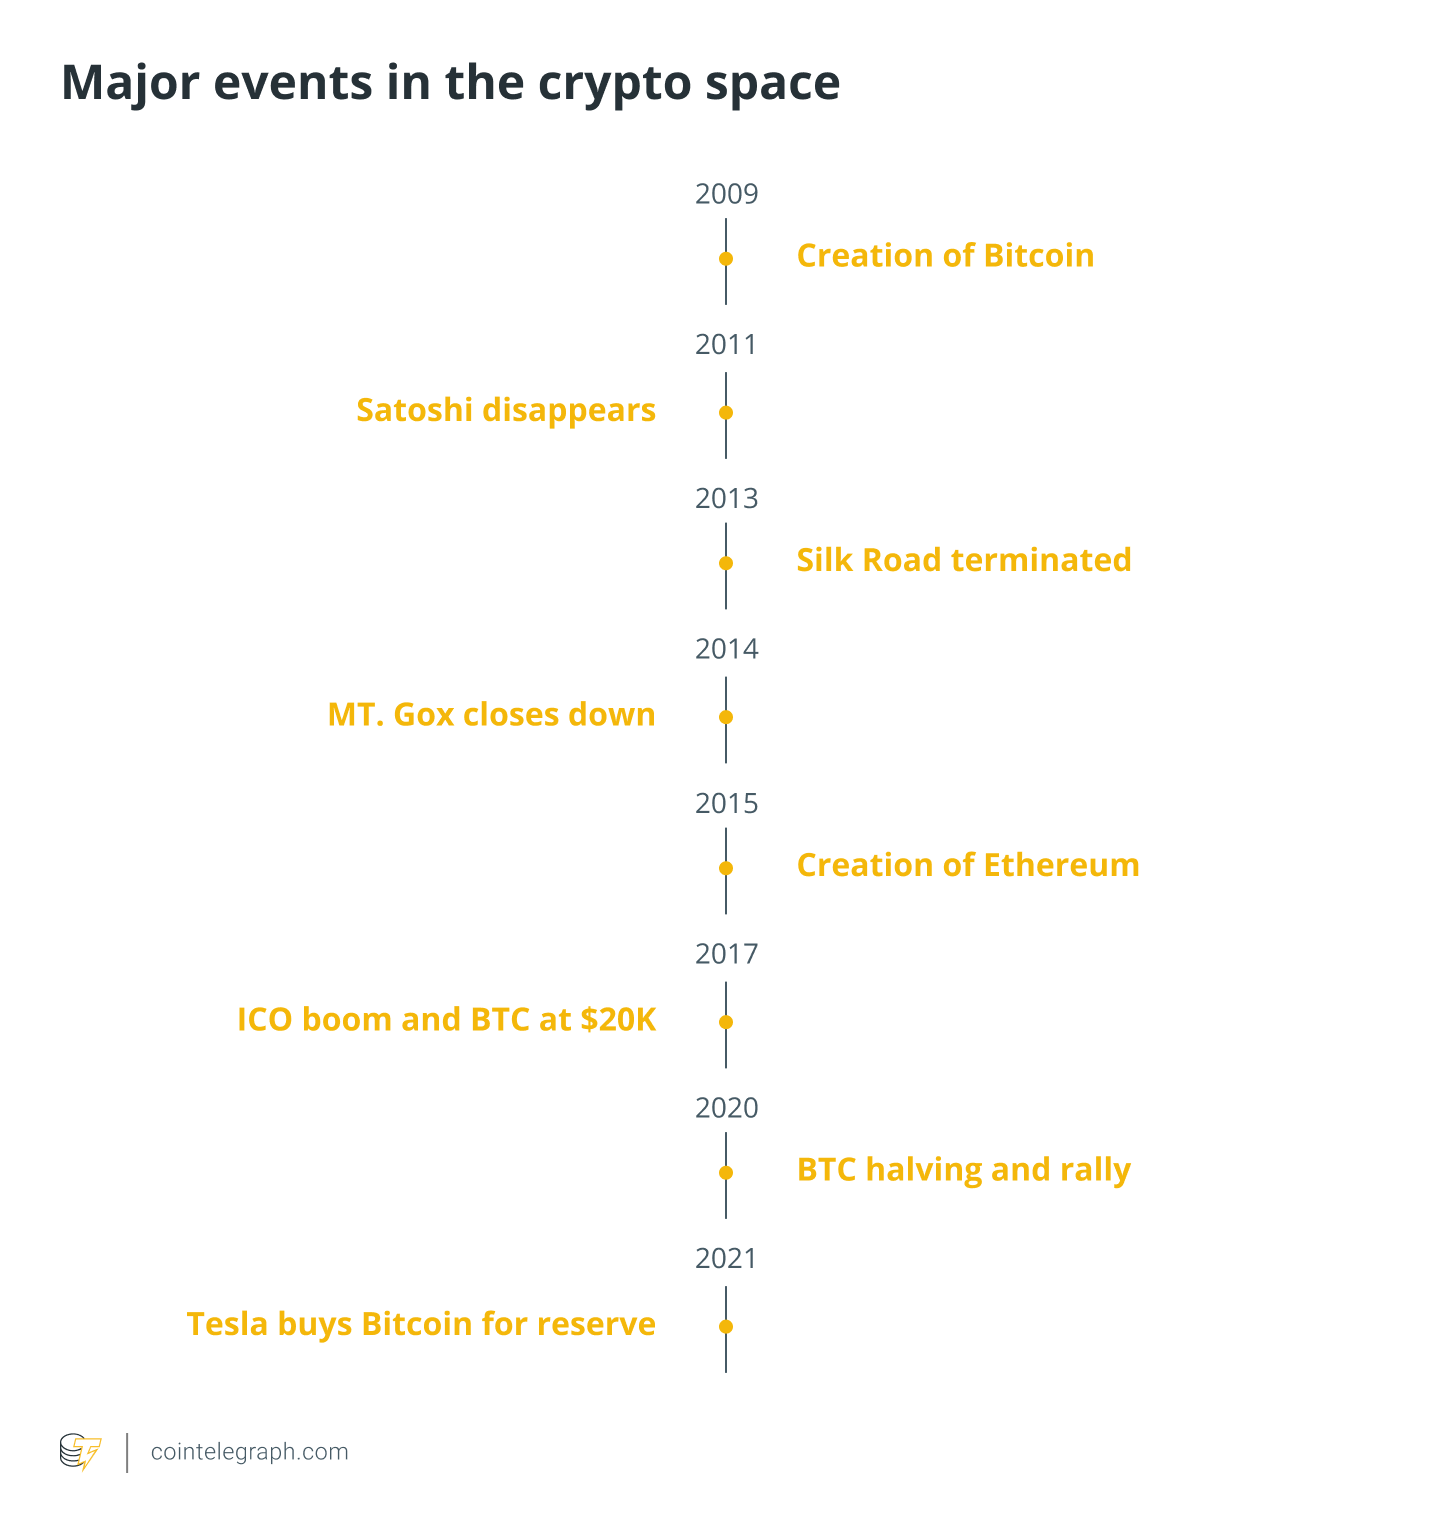 Major events in the crypto space